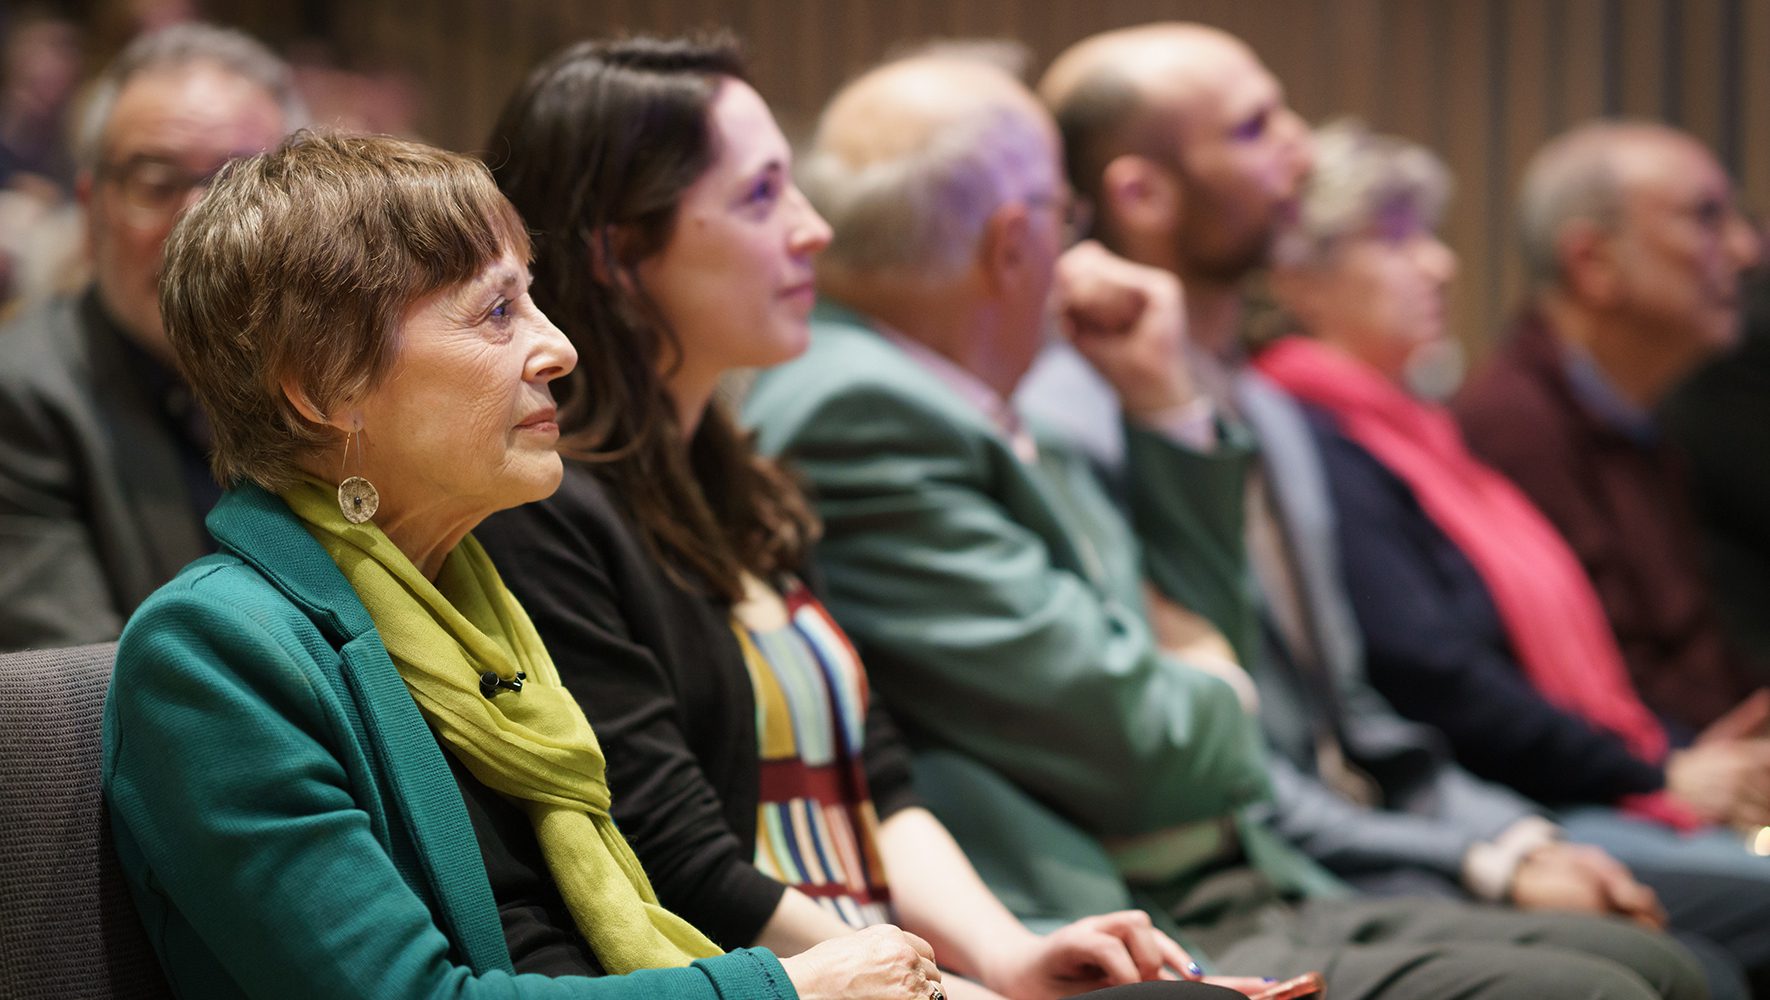 Dr. Edie Friedman, founder of JCORE, and her daughter Anna Isaacs listen to speakers during the HIAS+JCORE event